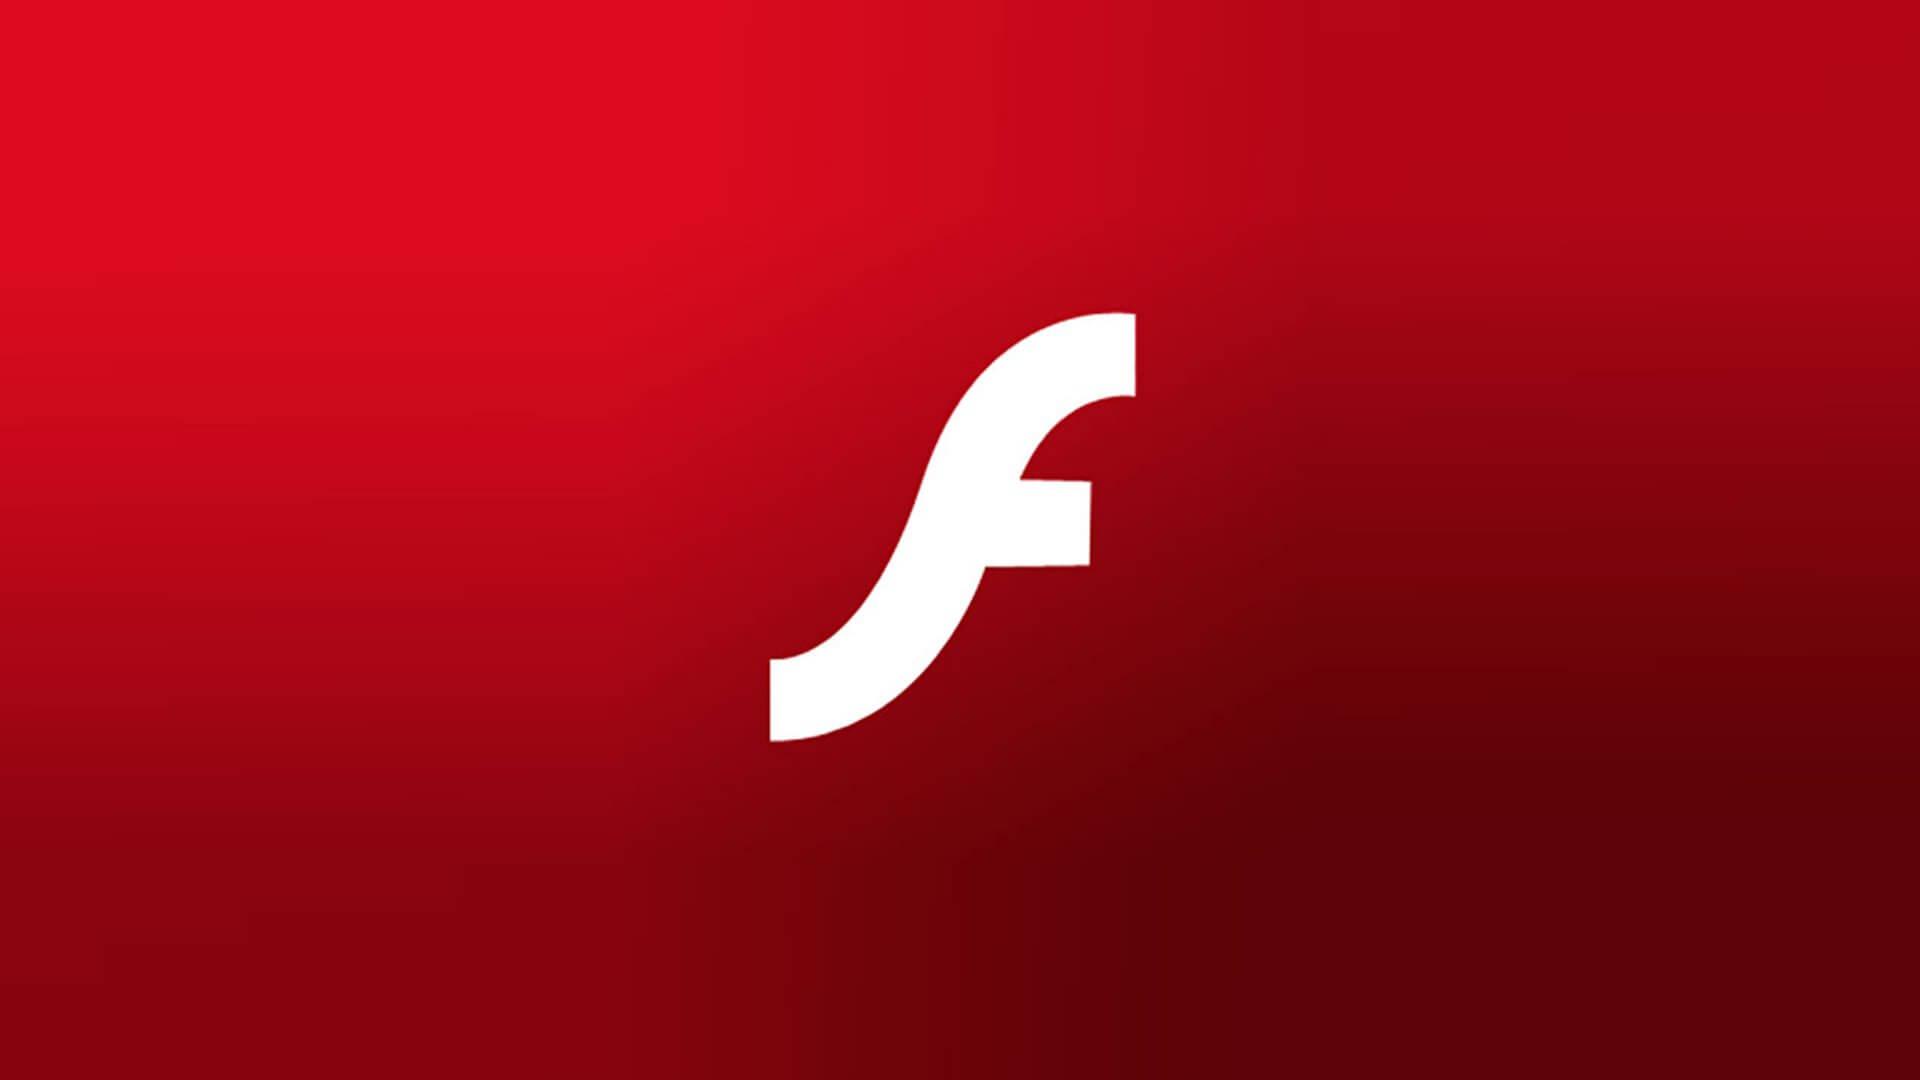 Windows getting security updates for Adobe Flash Player